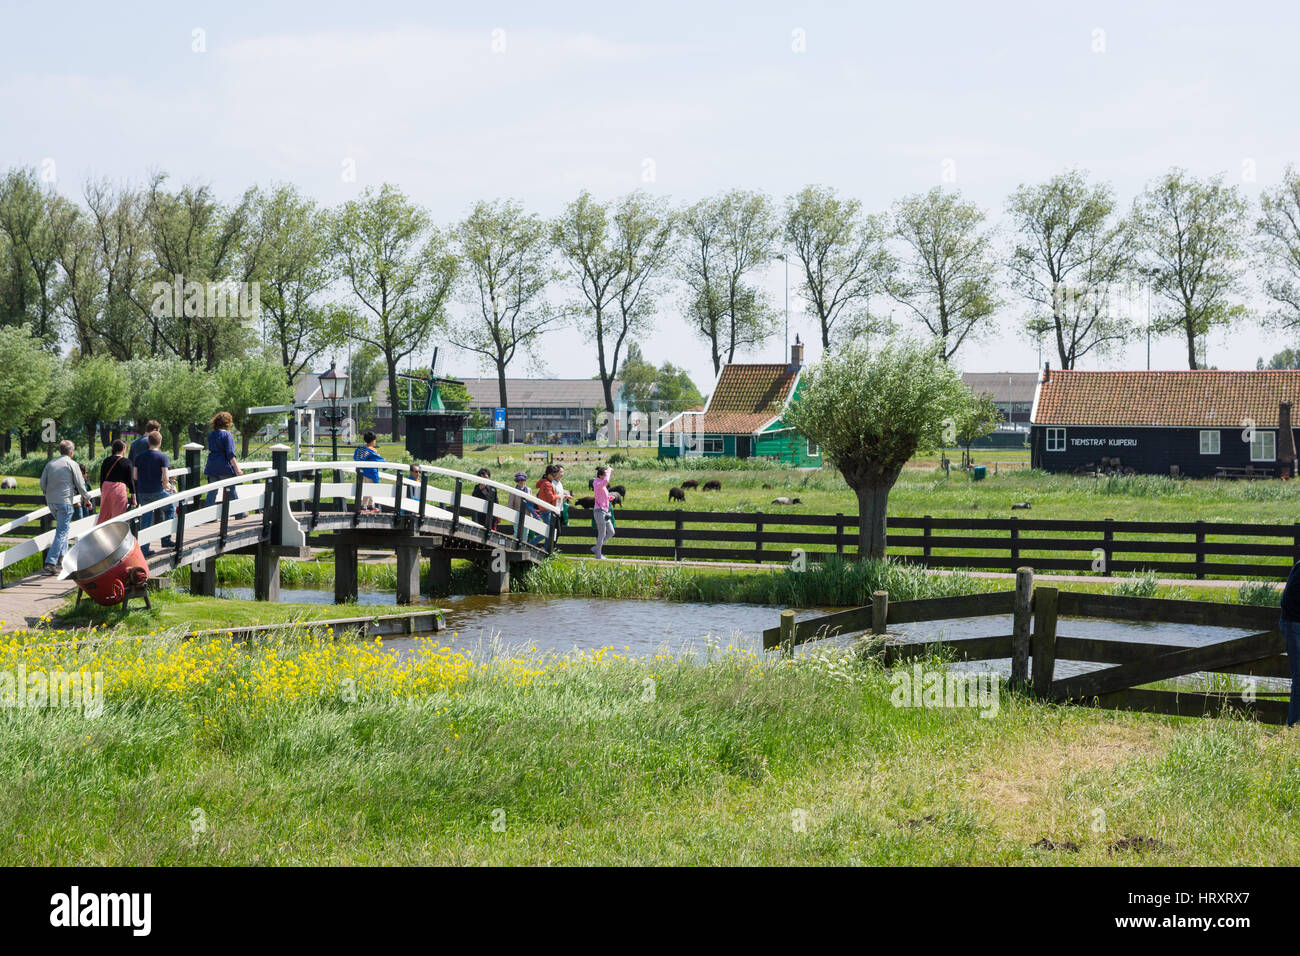 Many tourists enjoying the beautiful countryside of Zaanse Shans in The Netherlands Stock Photo